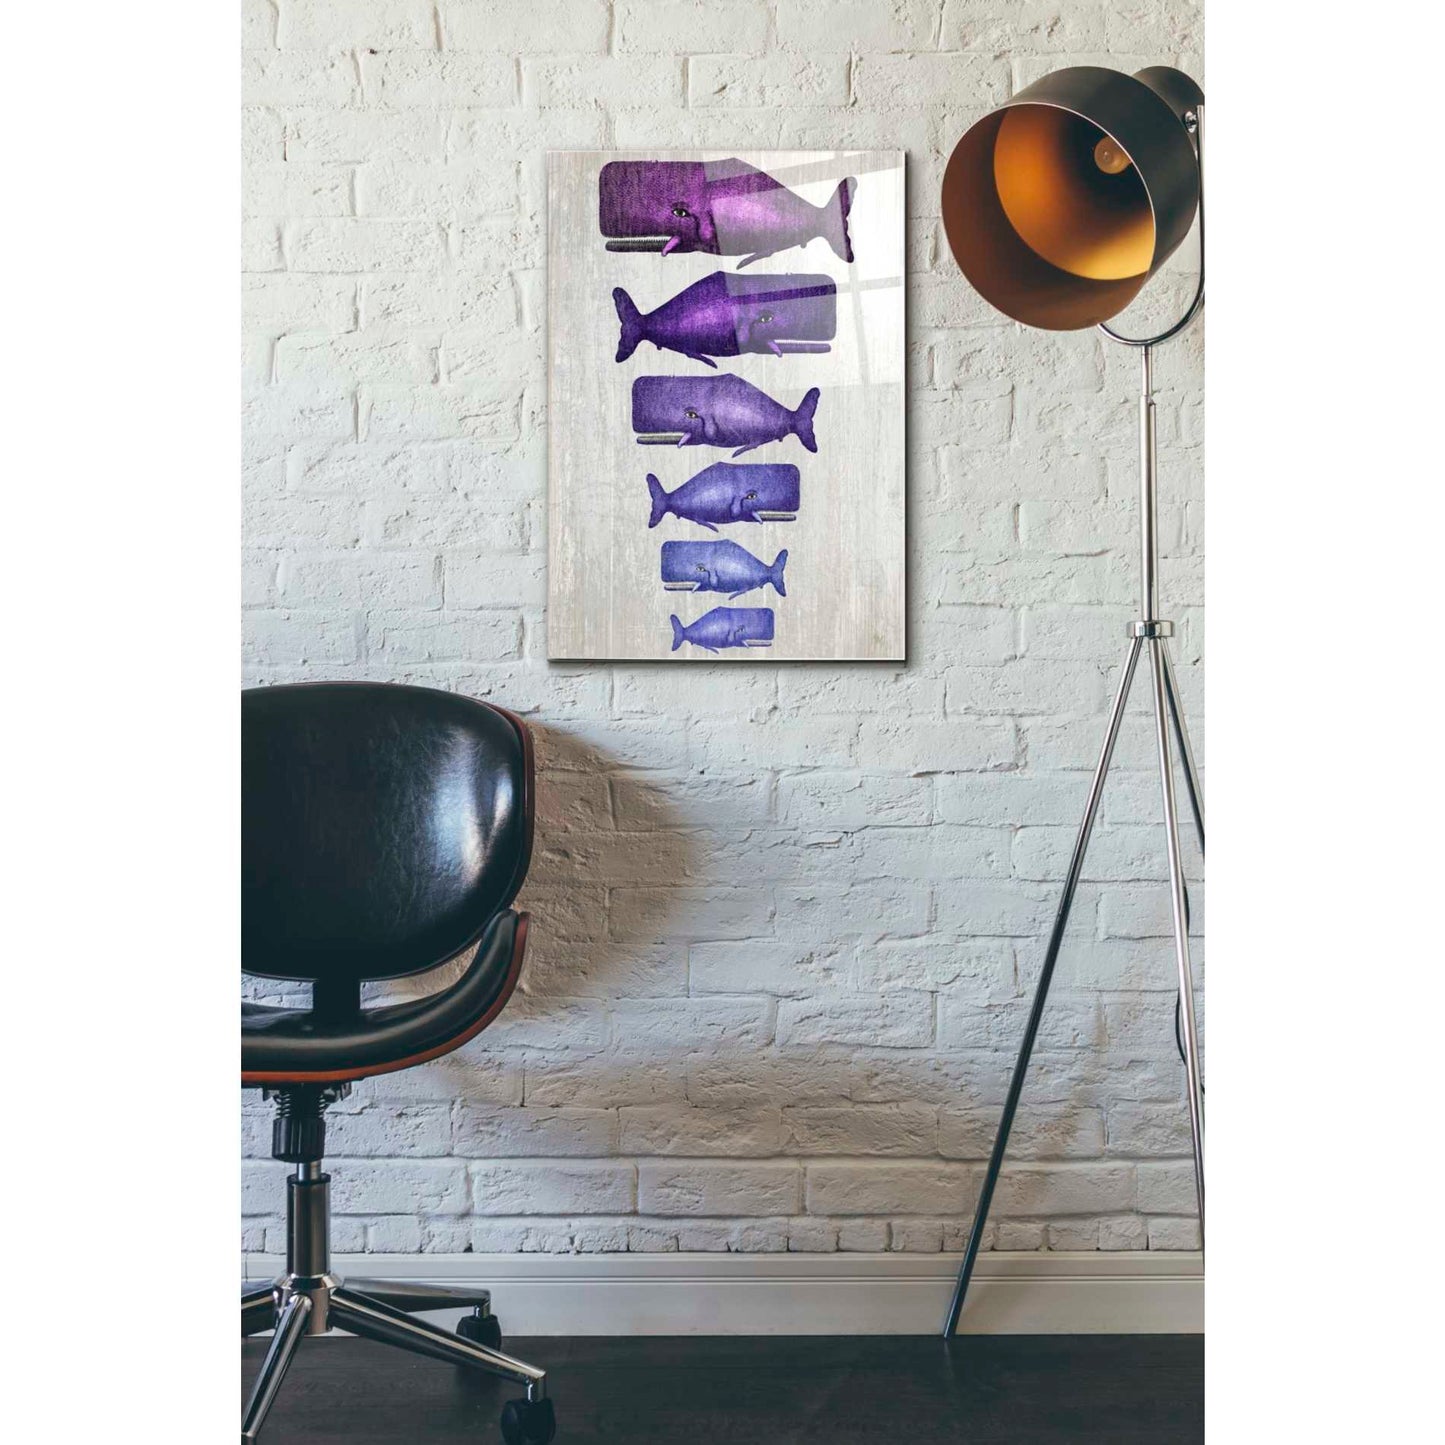 Epic Art 'Whale Family Purple on White' by Fab Funky Acrylic Glass Wall Art,16x24